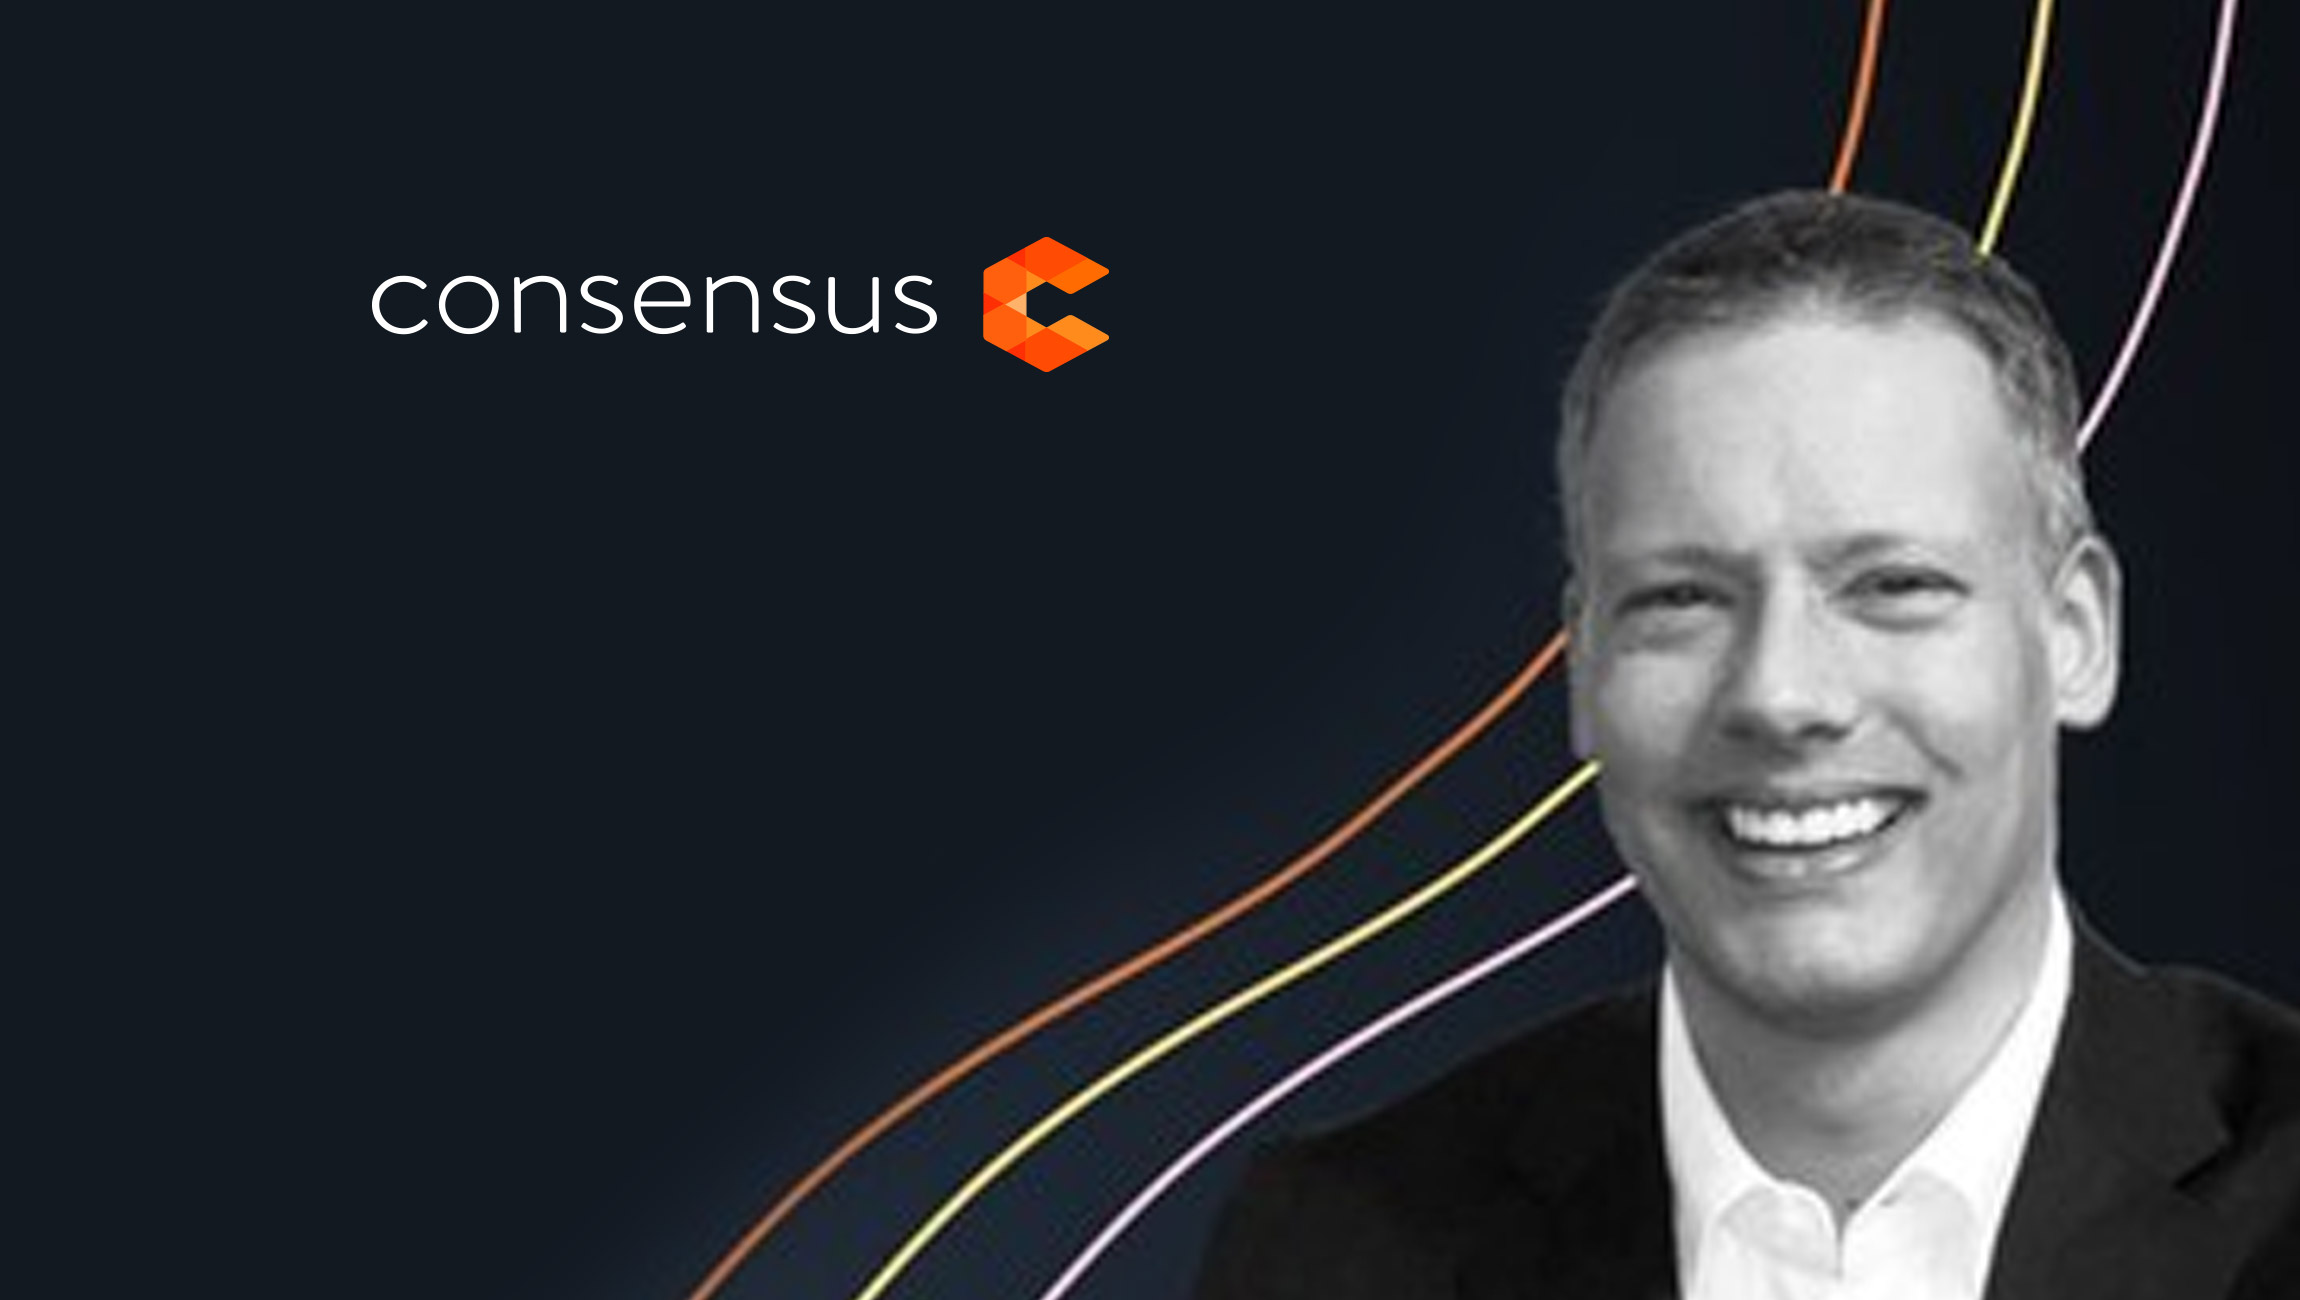 Brett Sheppard Joins Consensus, the Leader in Demo Automation for Presales, as VP of Marketing